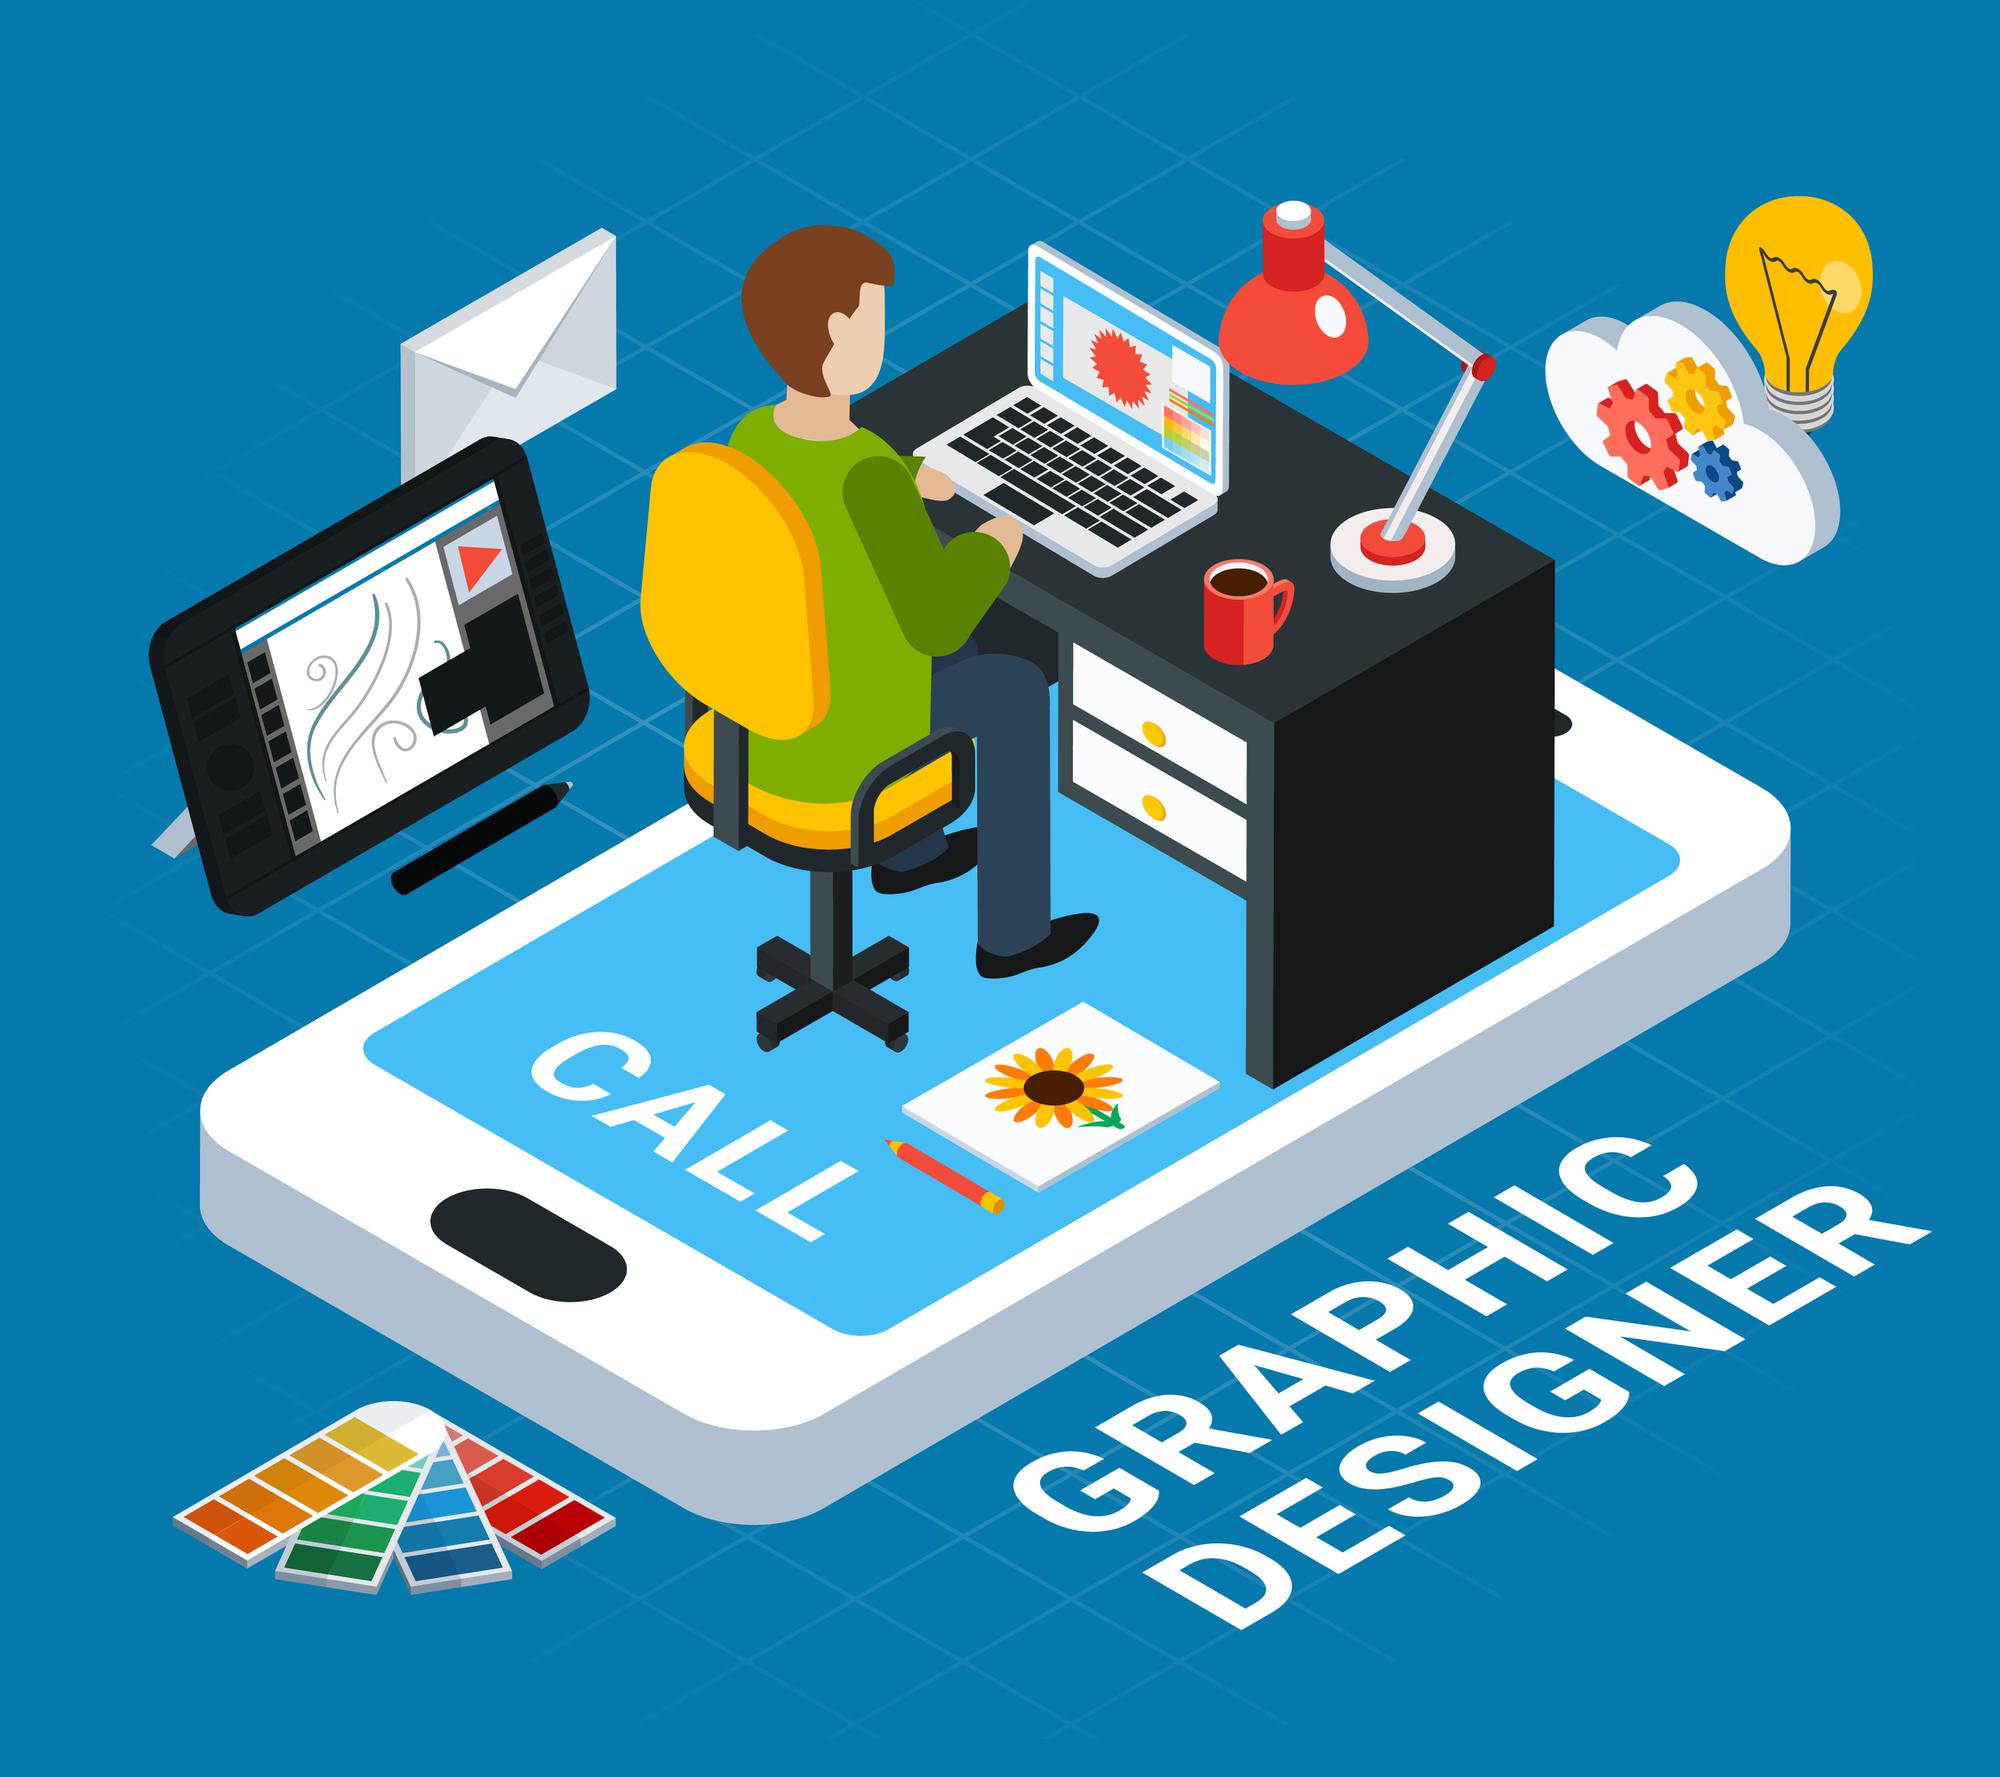 Branding and Graphic Design Services